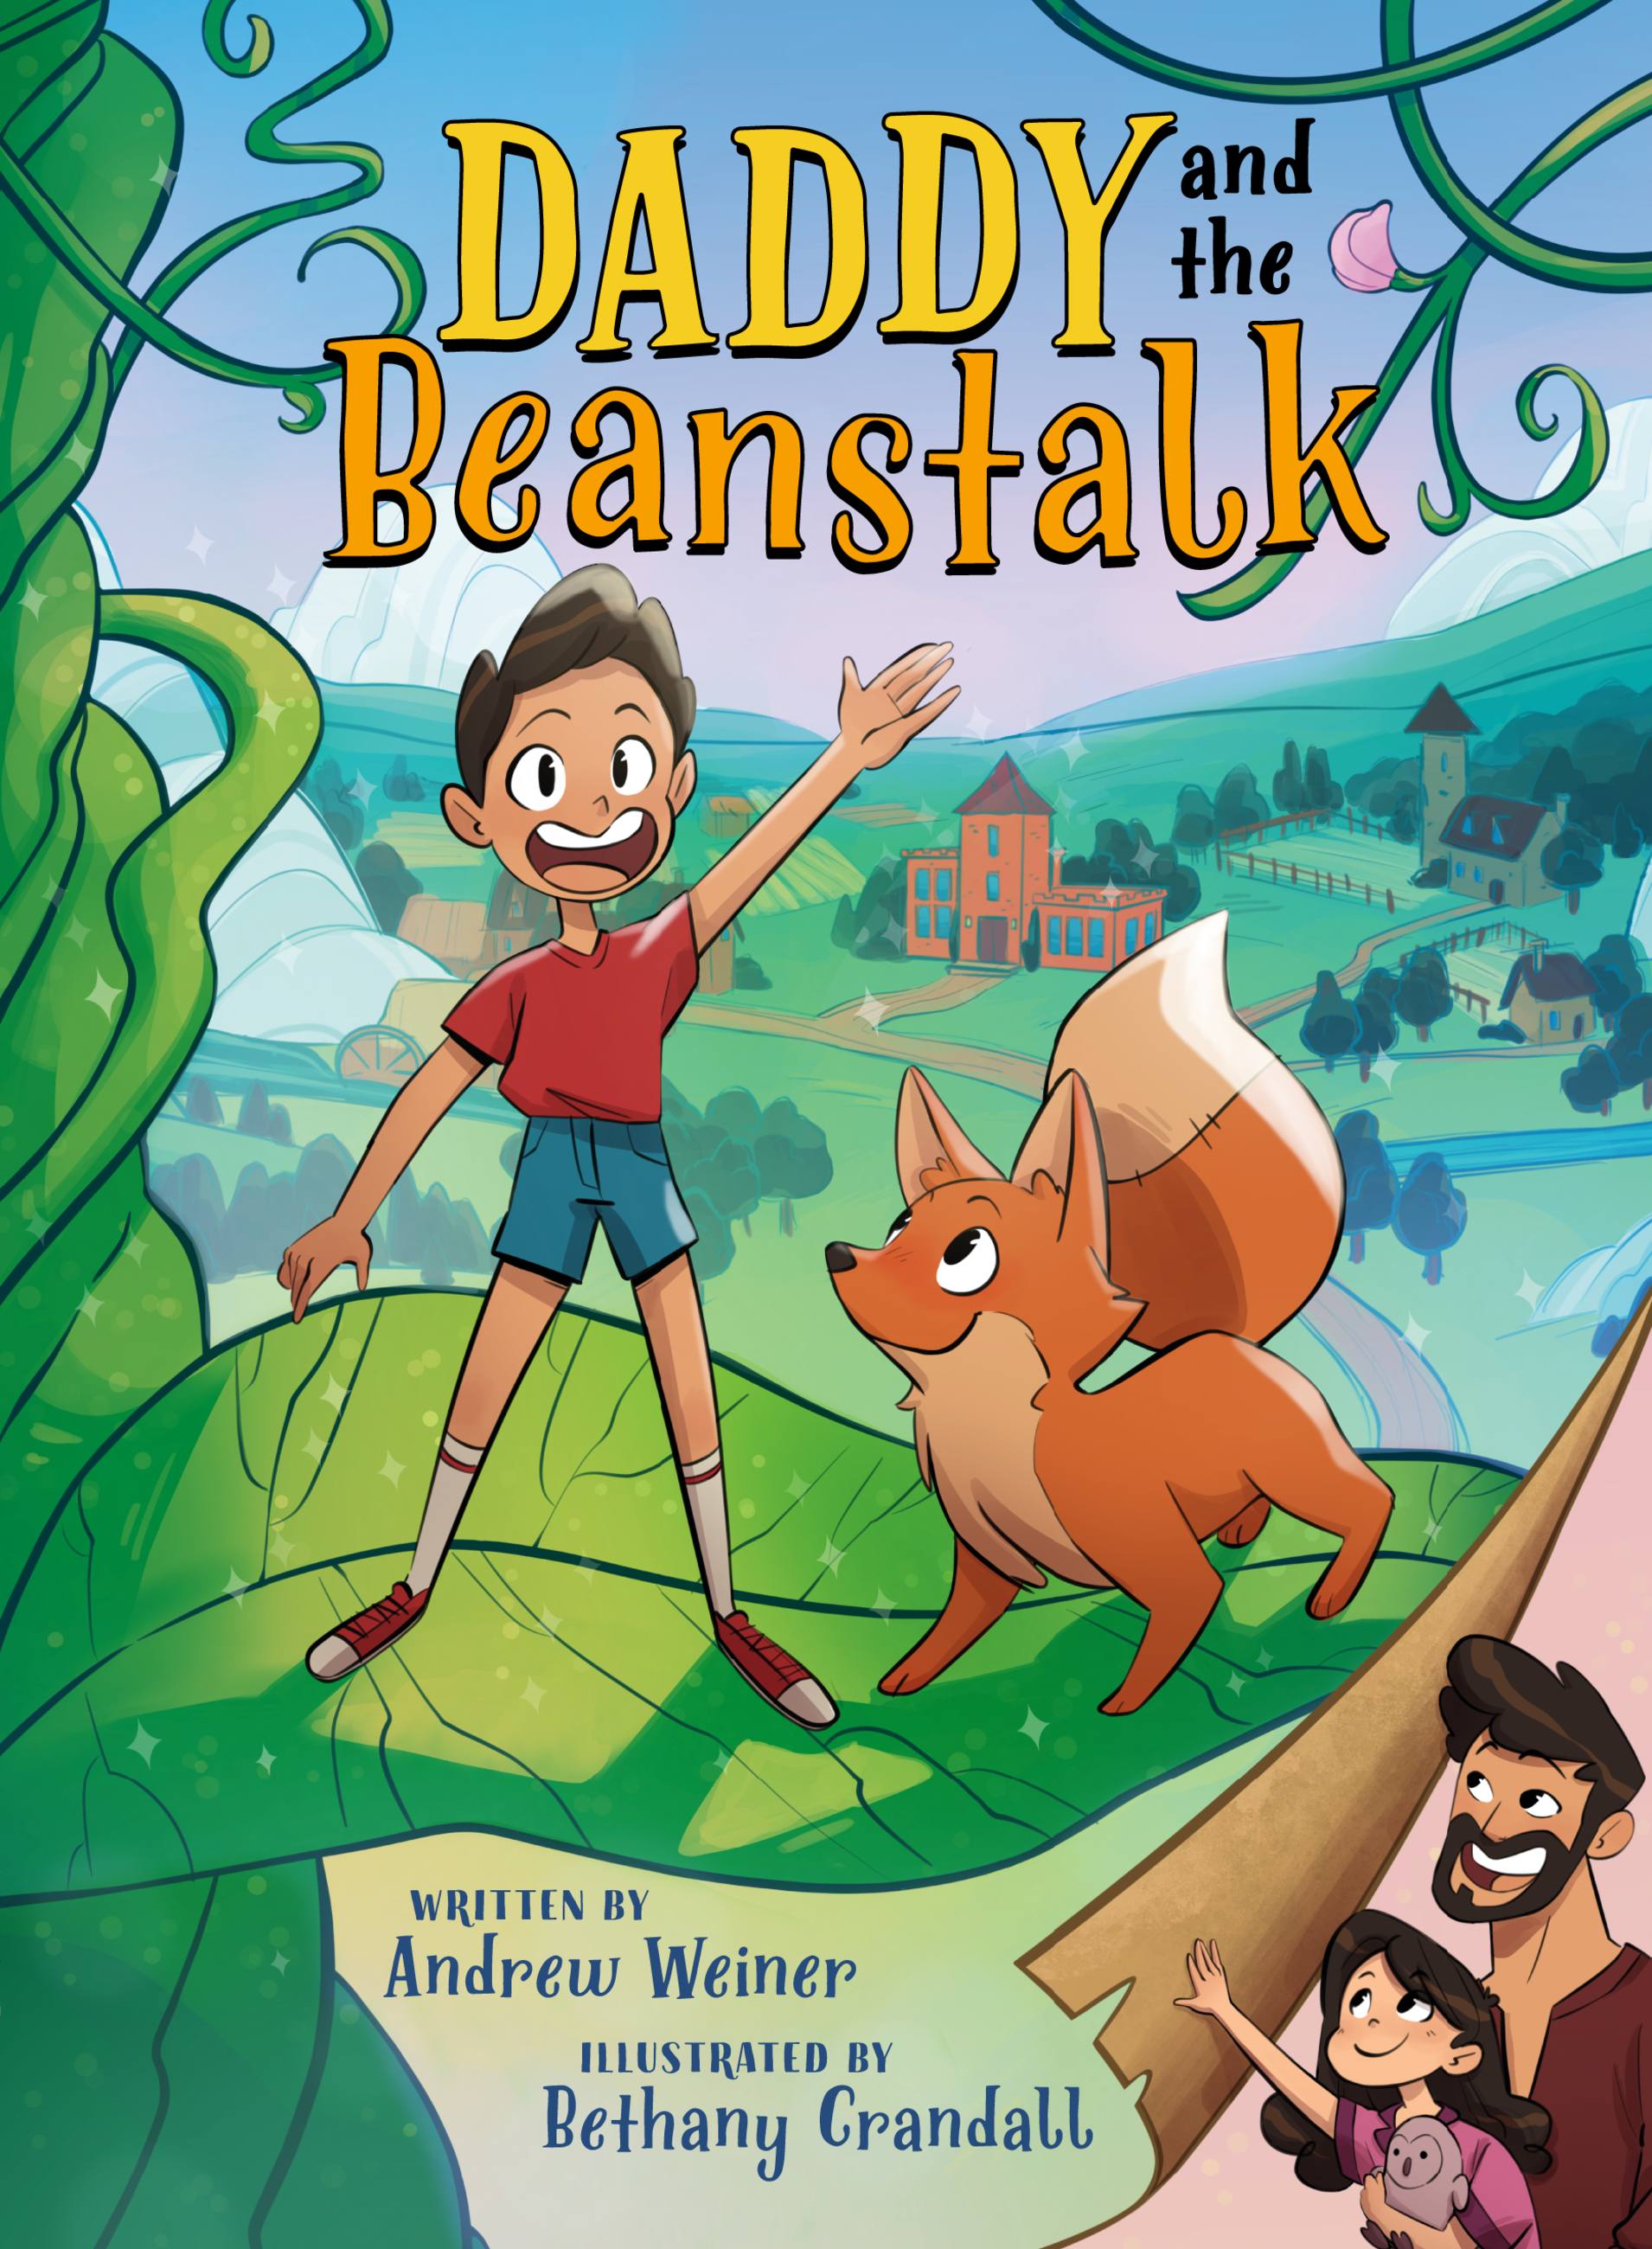 Daddy and the Beanstalk (A Graphic Novel) by Andrew Weiner